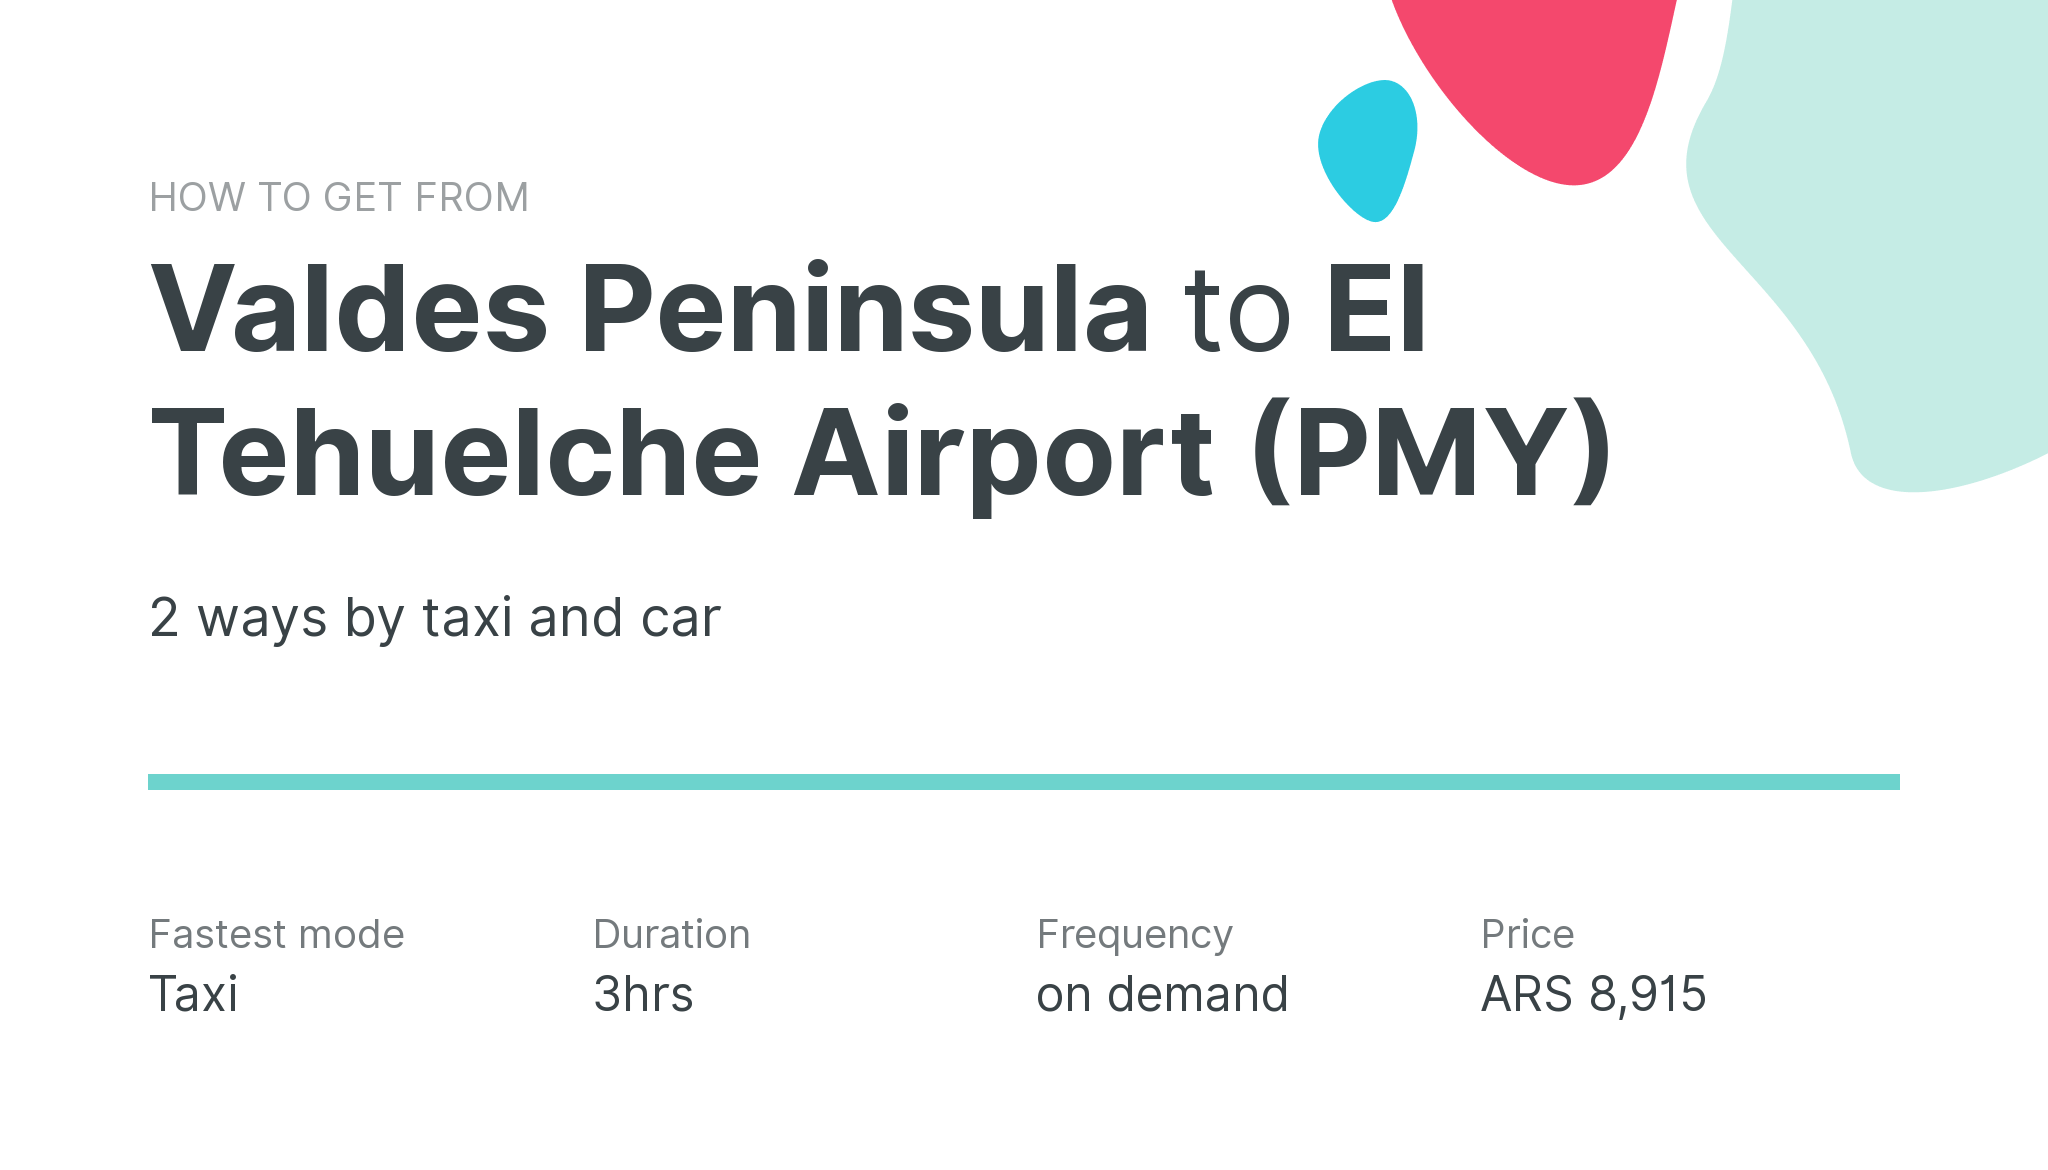 How do I get from Valdes Peninsula to El Tehuelche Airport (PMY)